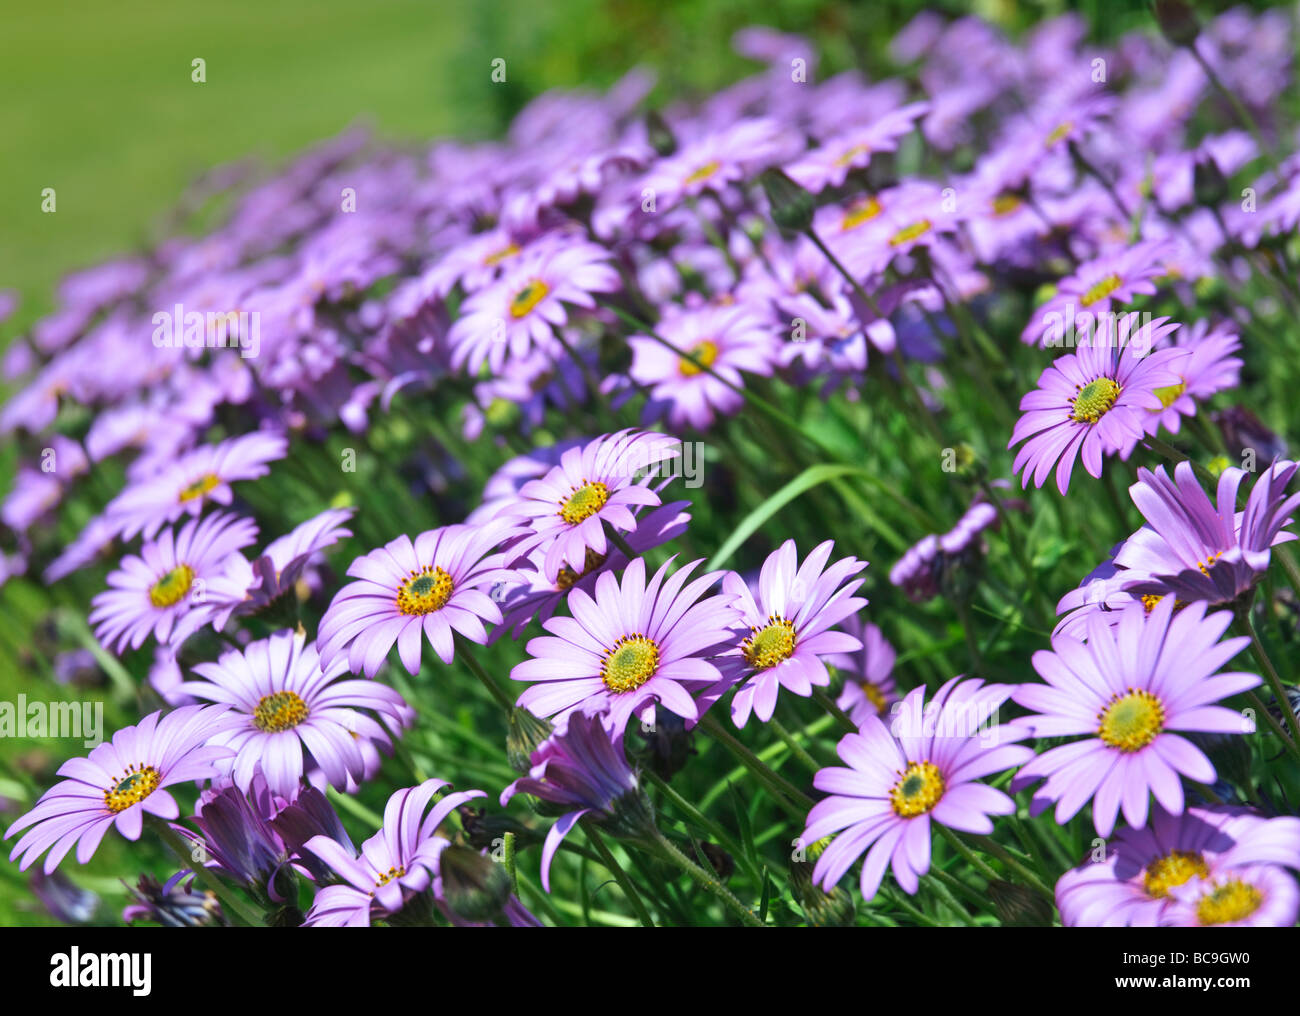 A bed of Osteospermum, also known as African Daisies, compete for the attention of the afternoon sun. Stock Photo